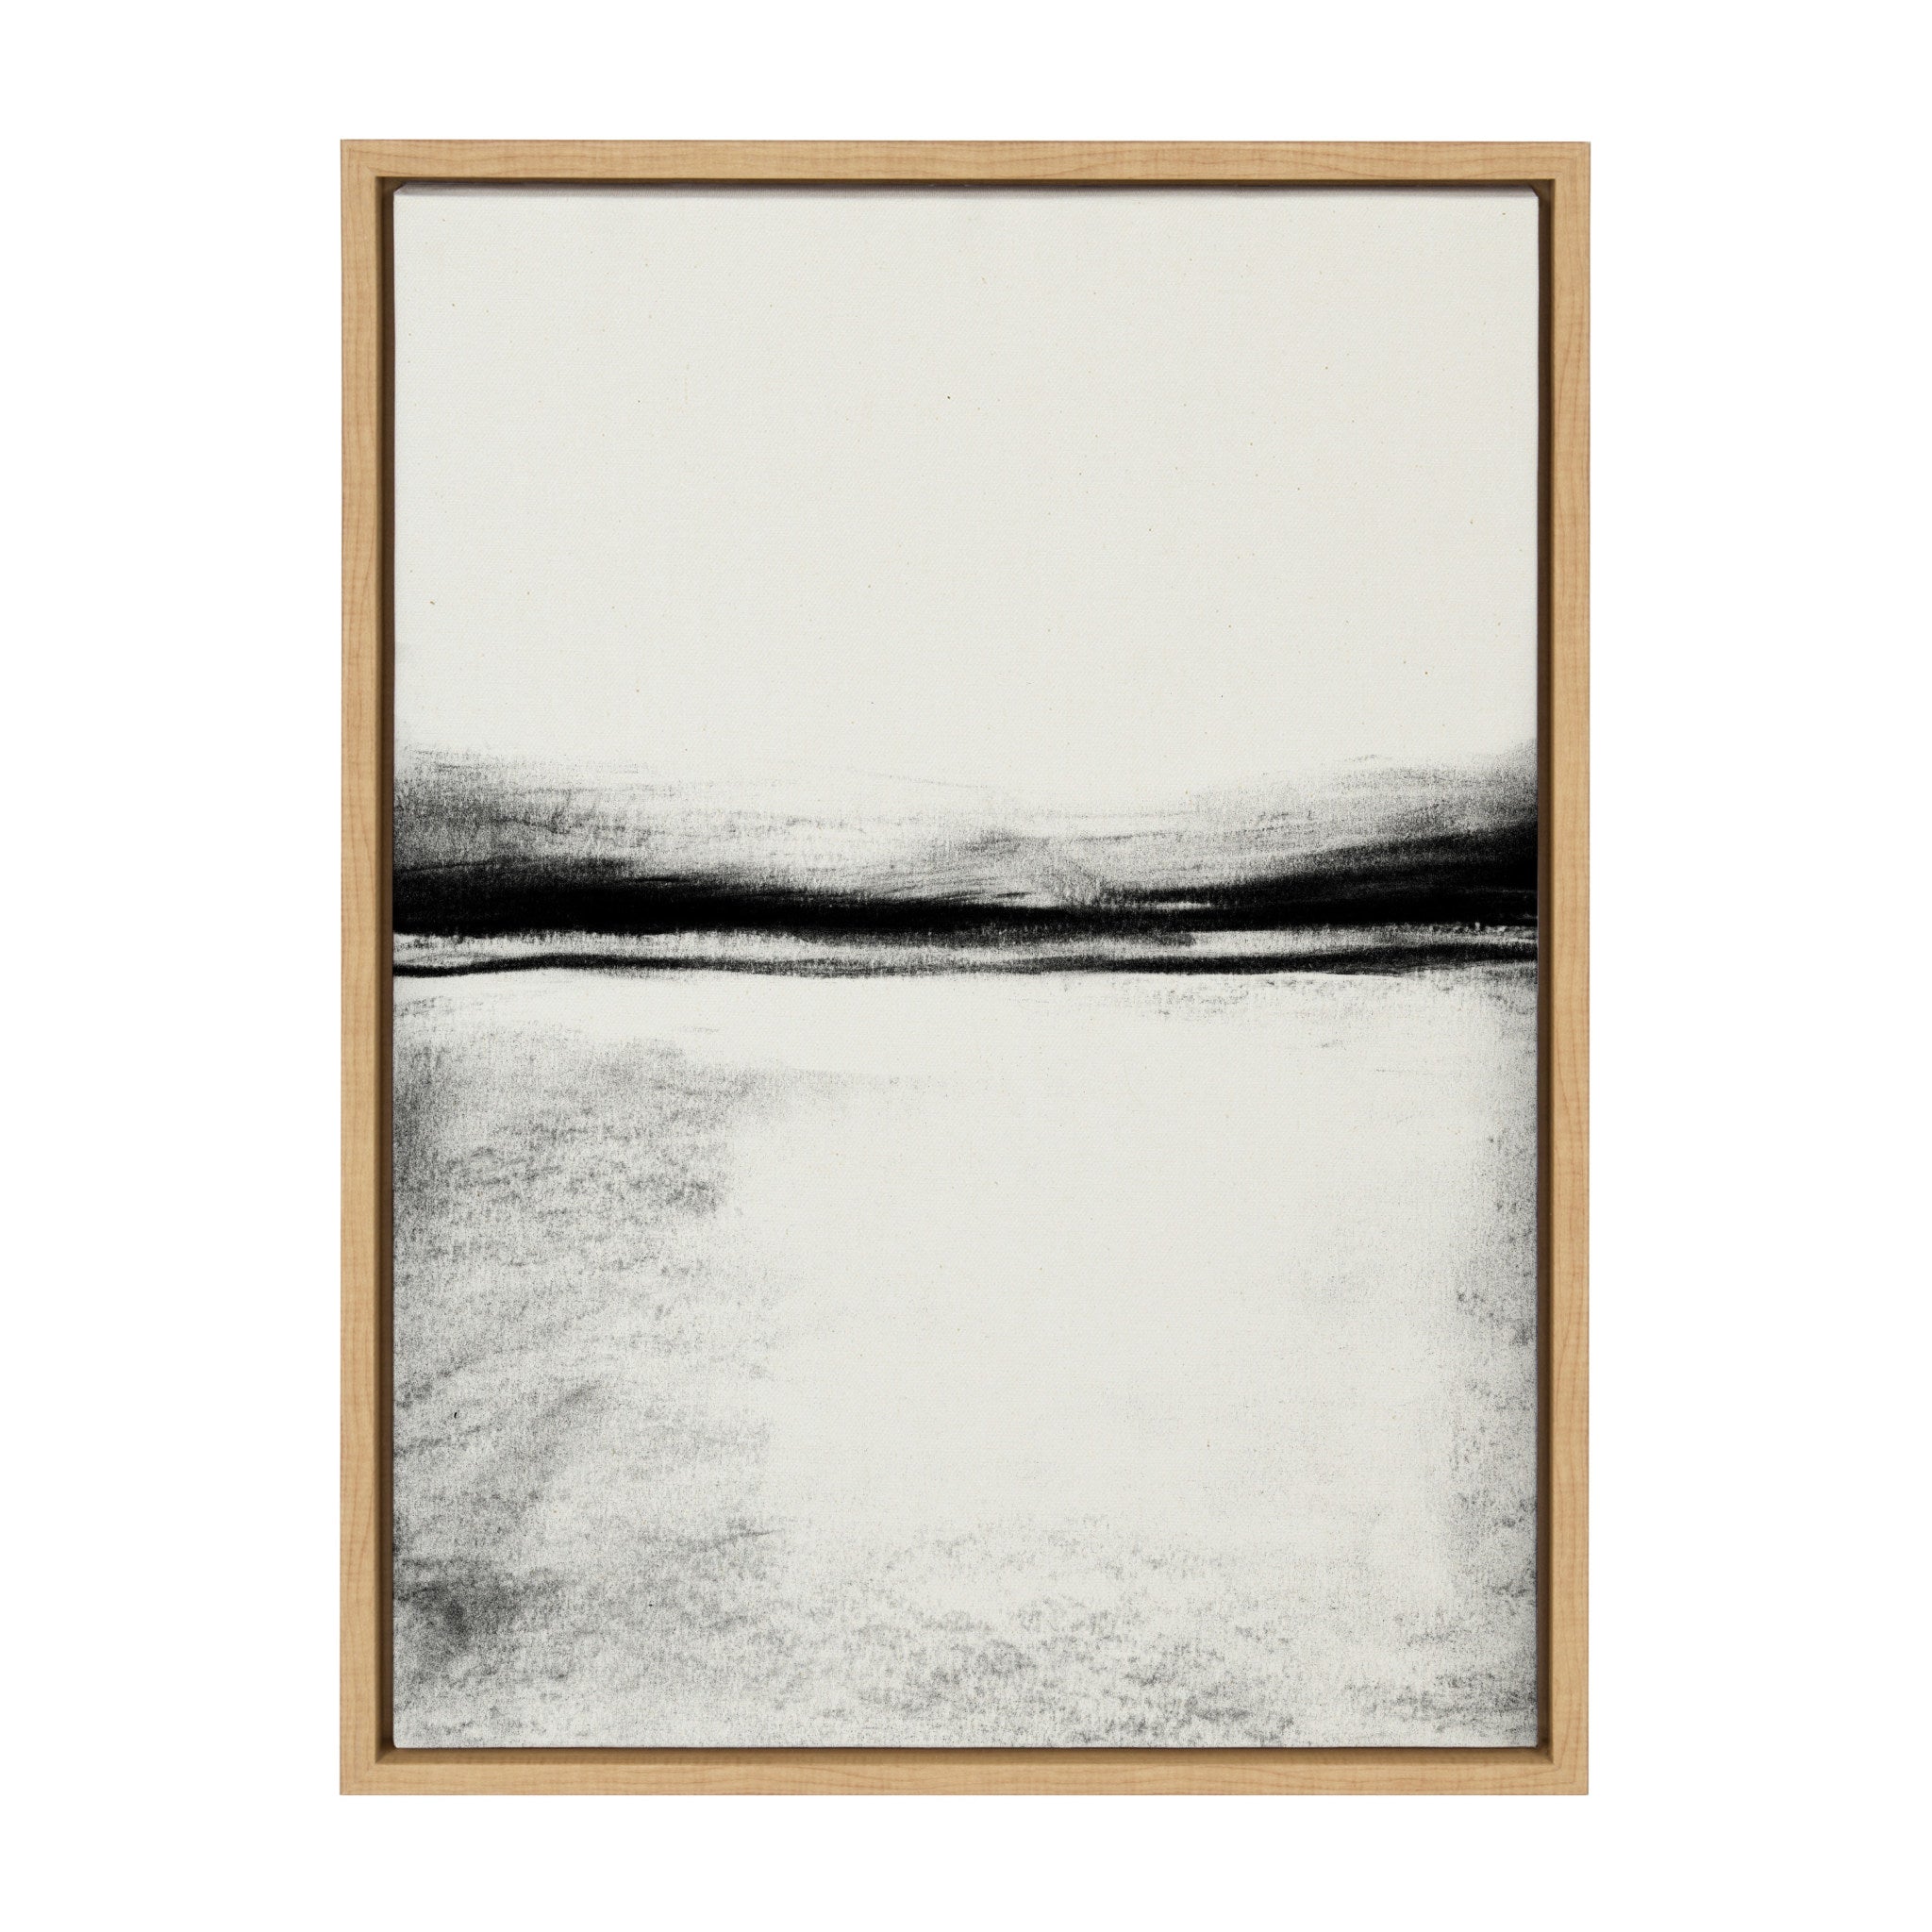 Sylvie 646 Charcoal Landscape Framed Canvas by Teju Reval of SnazzyHues